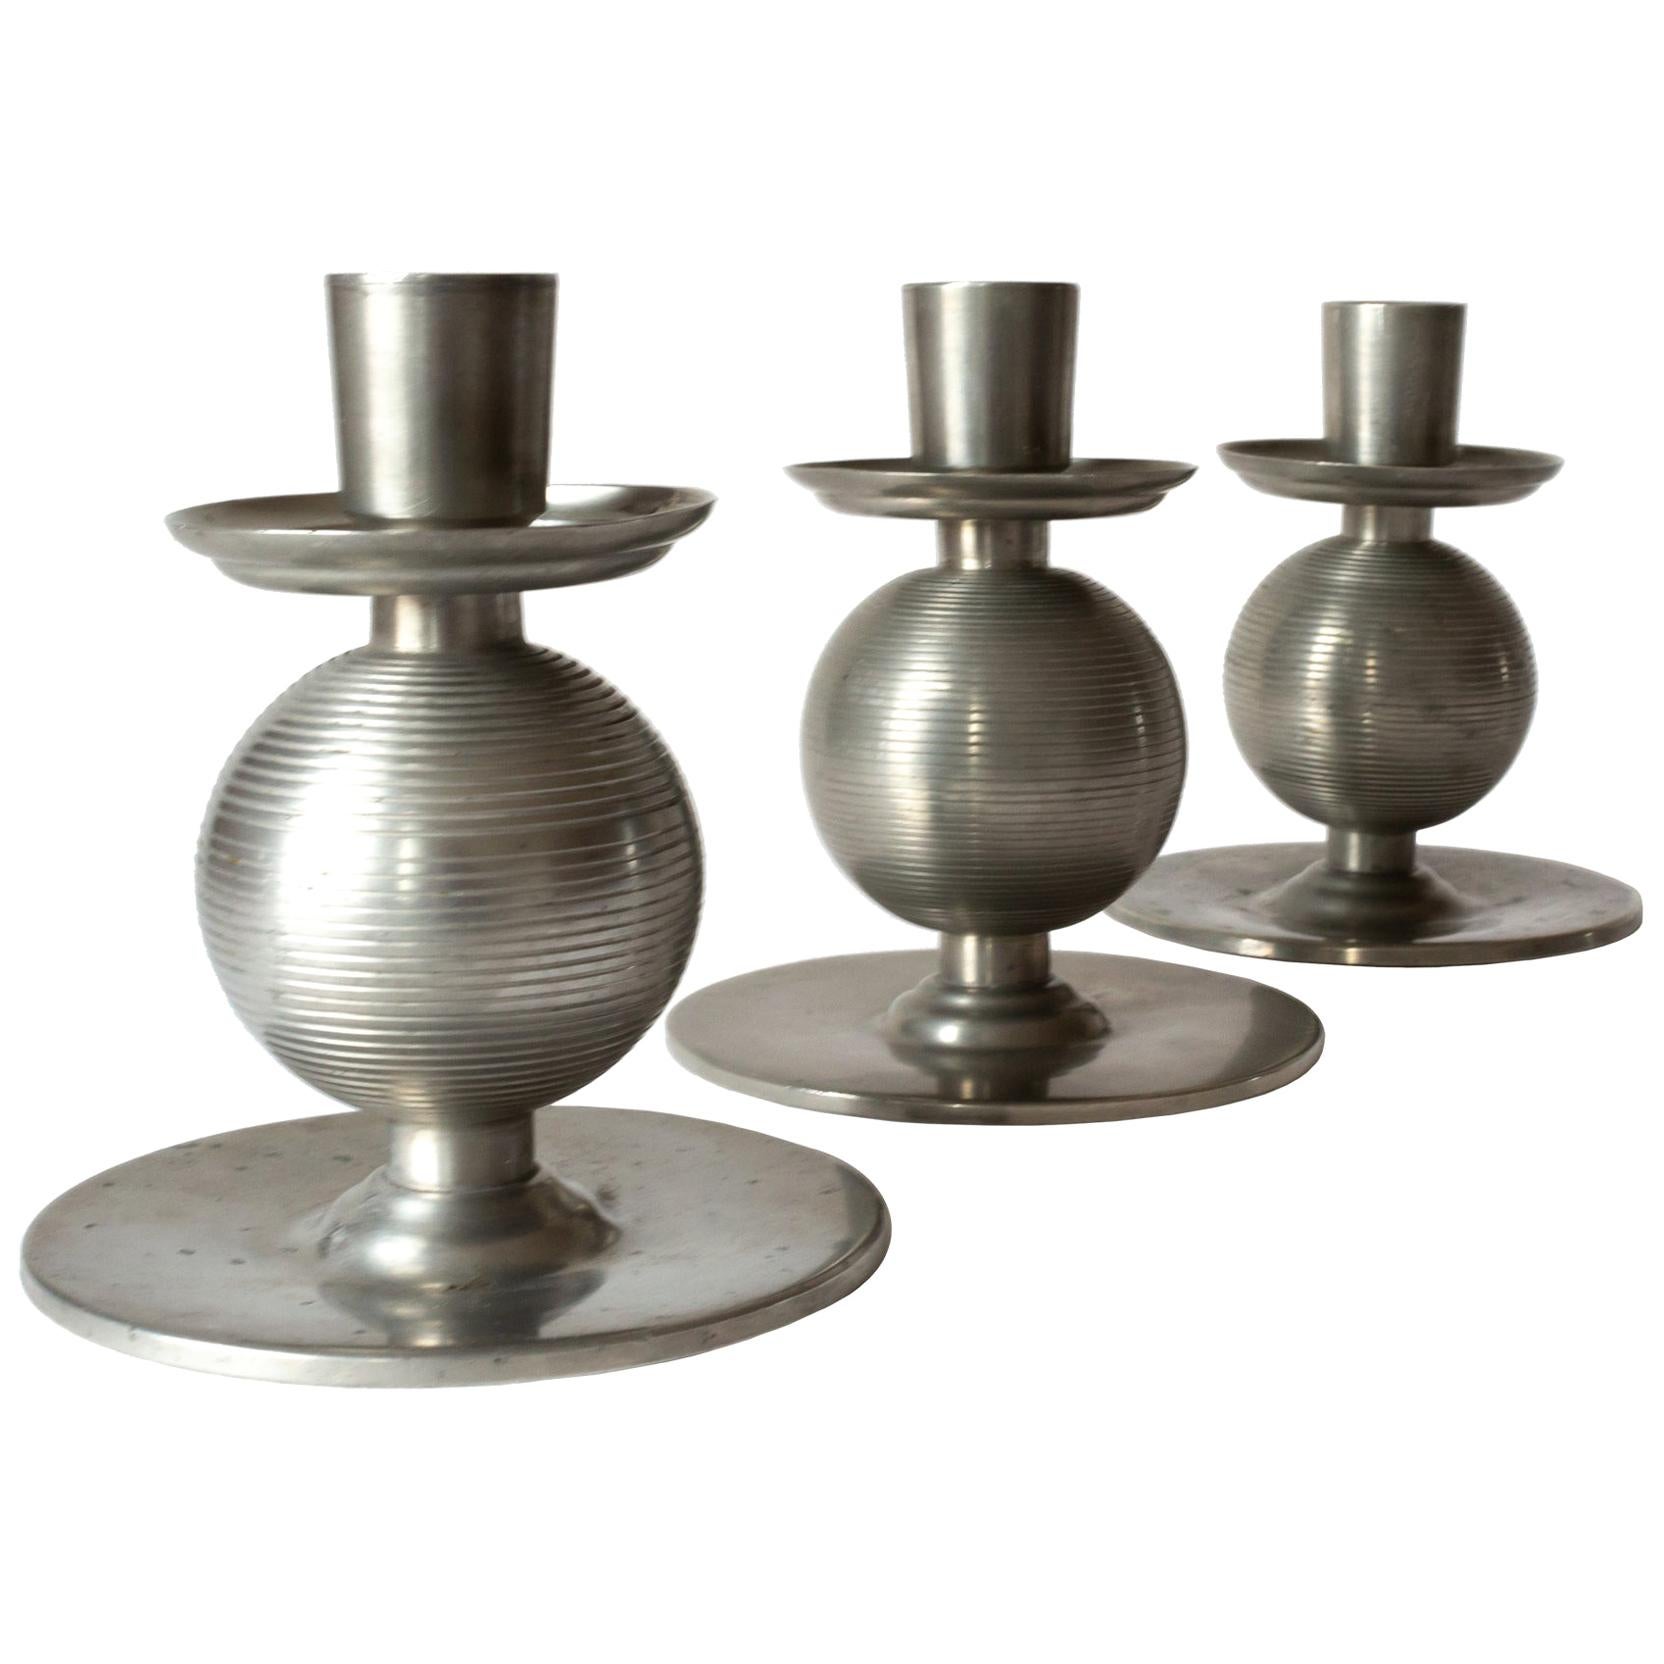 Three Art Deco Pewter Candlesticks Signed by Nils Fougstedt and Made 1937 For Sale